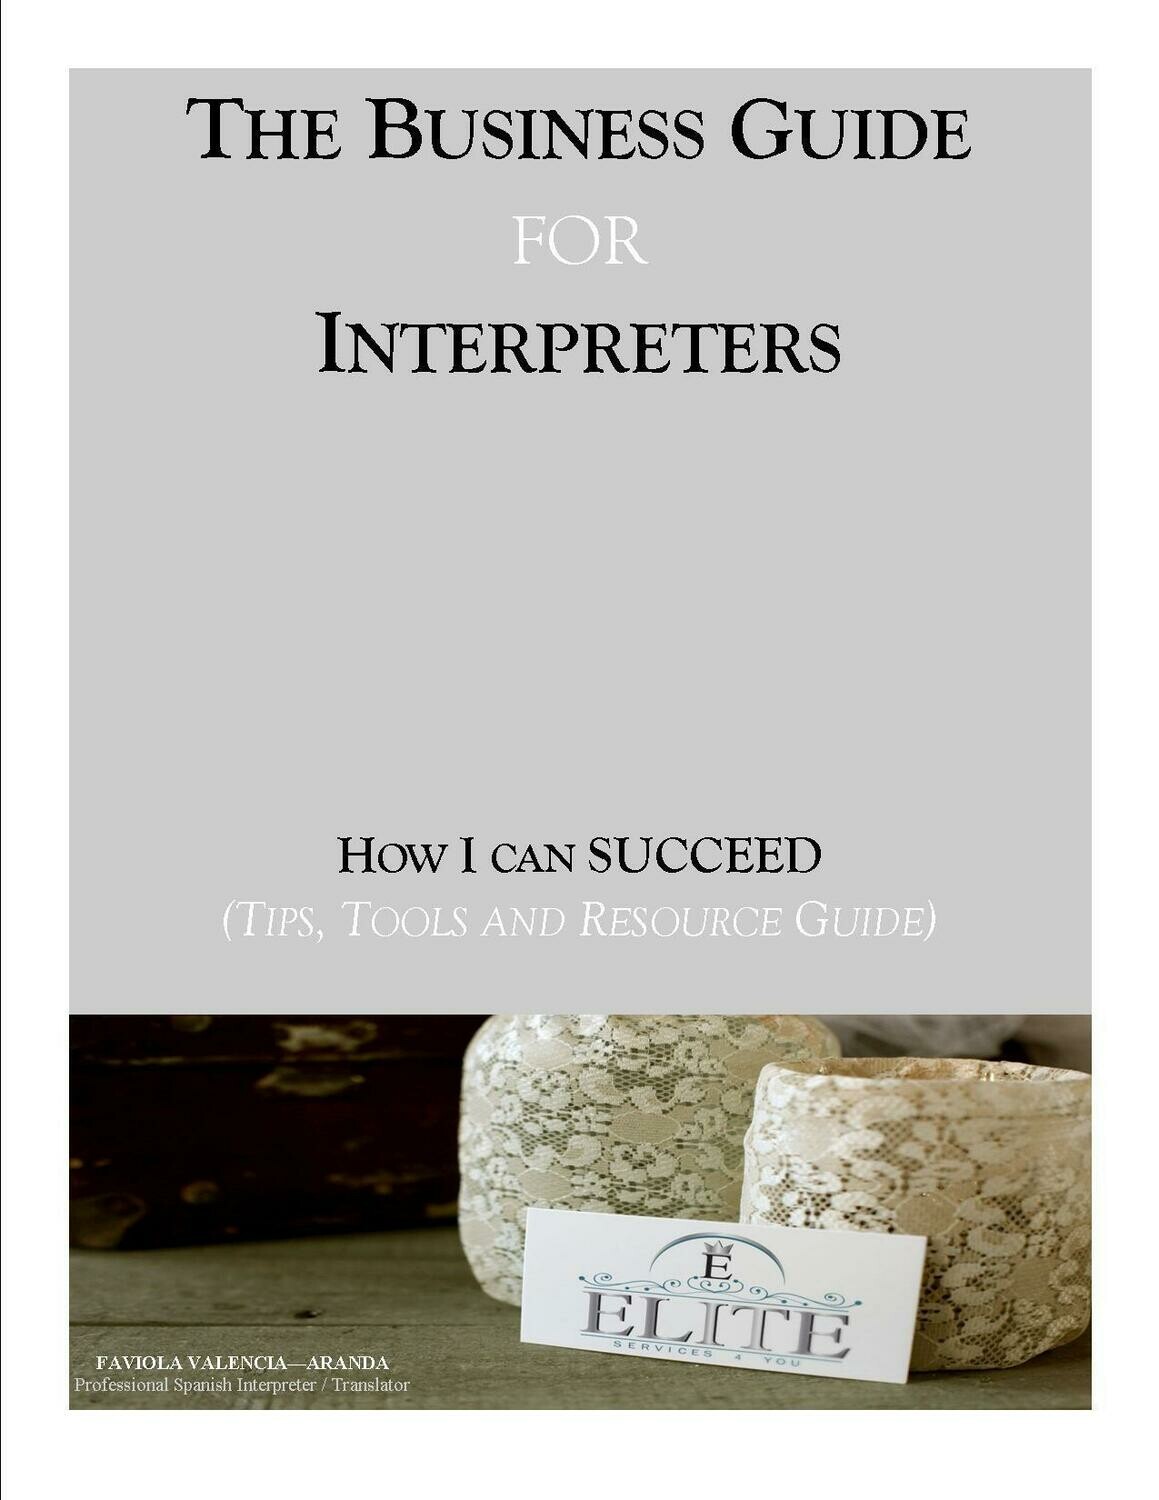 "The Business Guide for Interpreters"